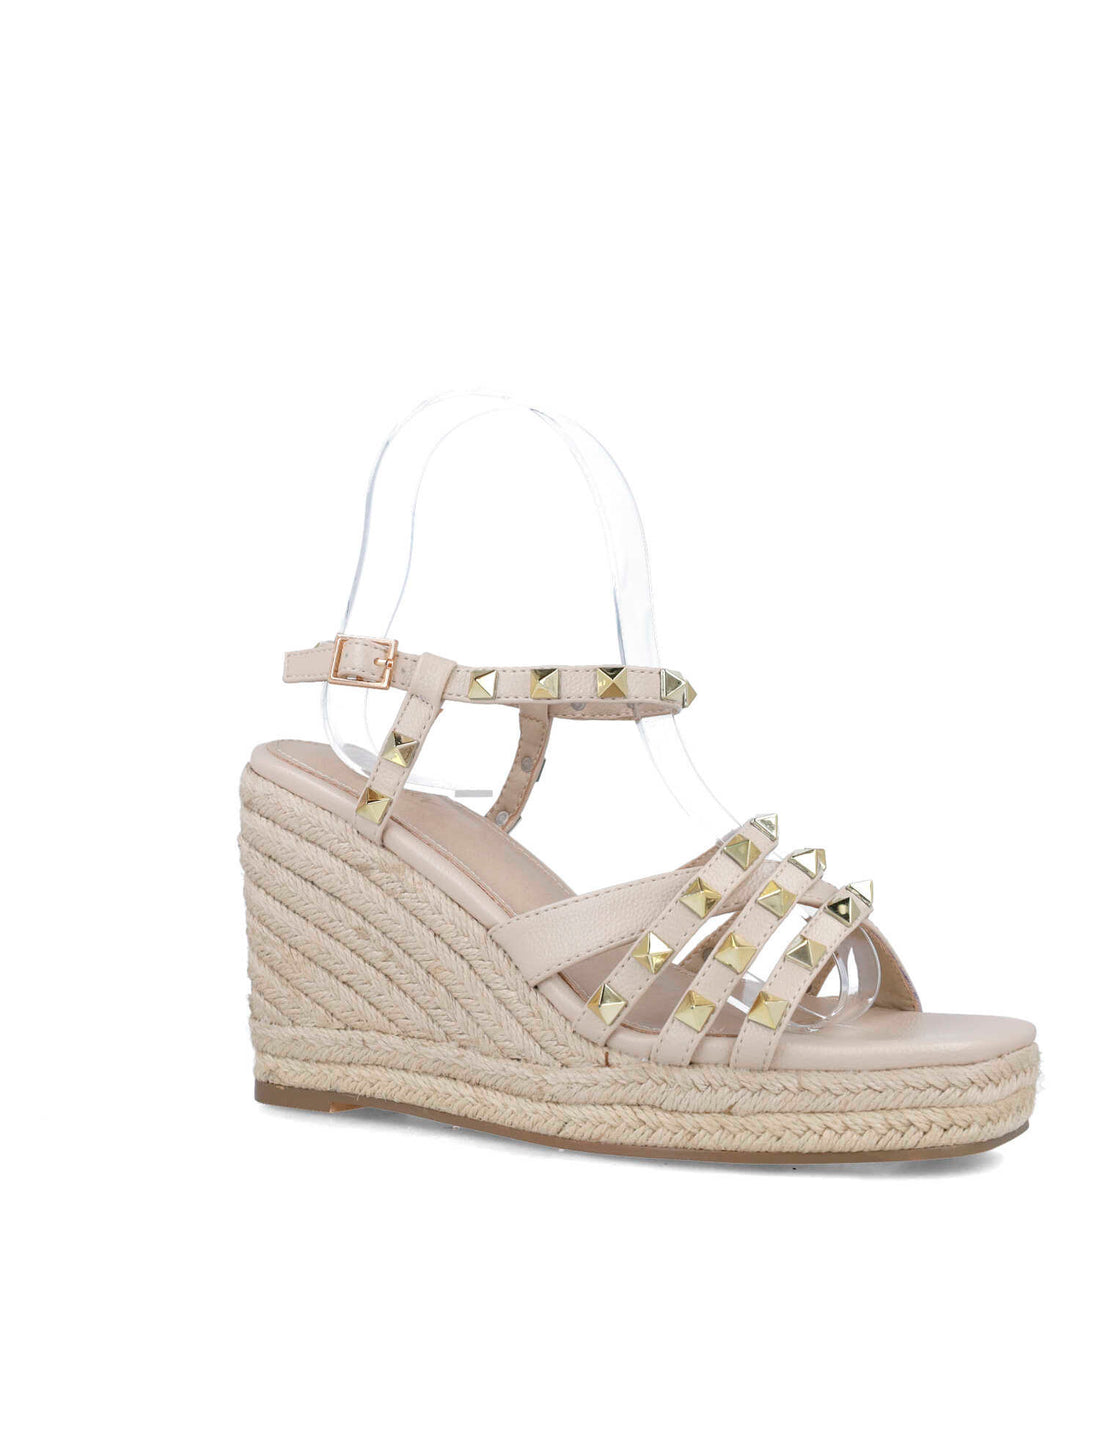 Studded Wedges With Braided Platform_24909_06_02